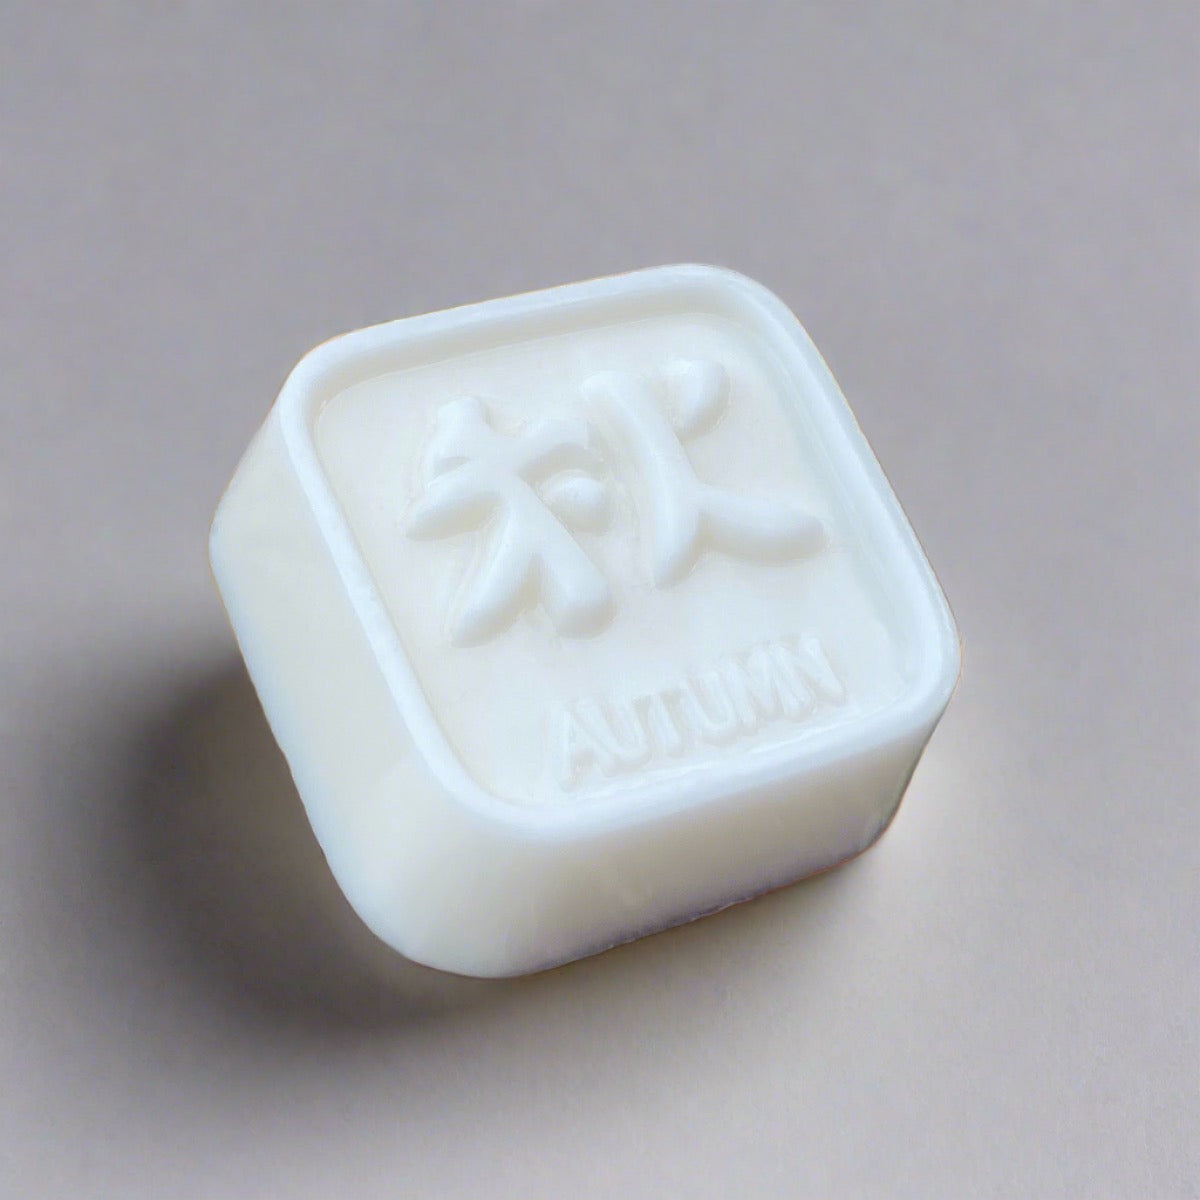 Bar of white soap with beautiful Chinese symbols meaning "autumn" design 